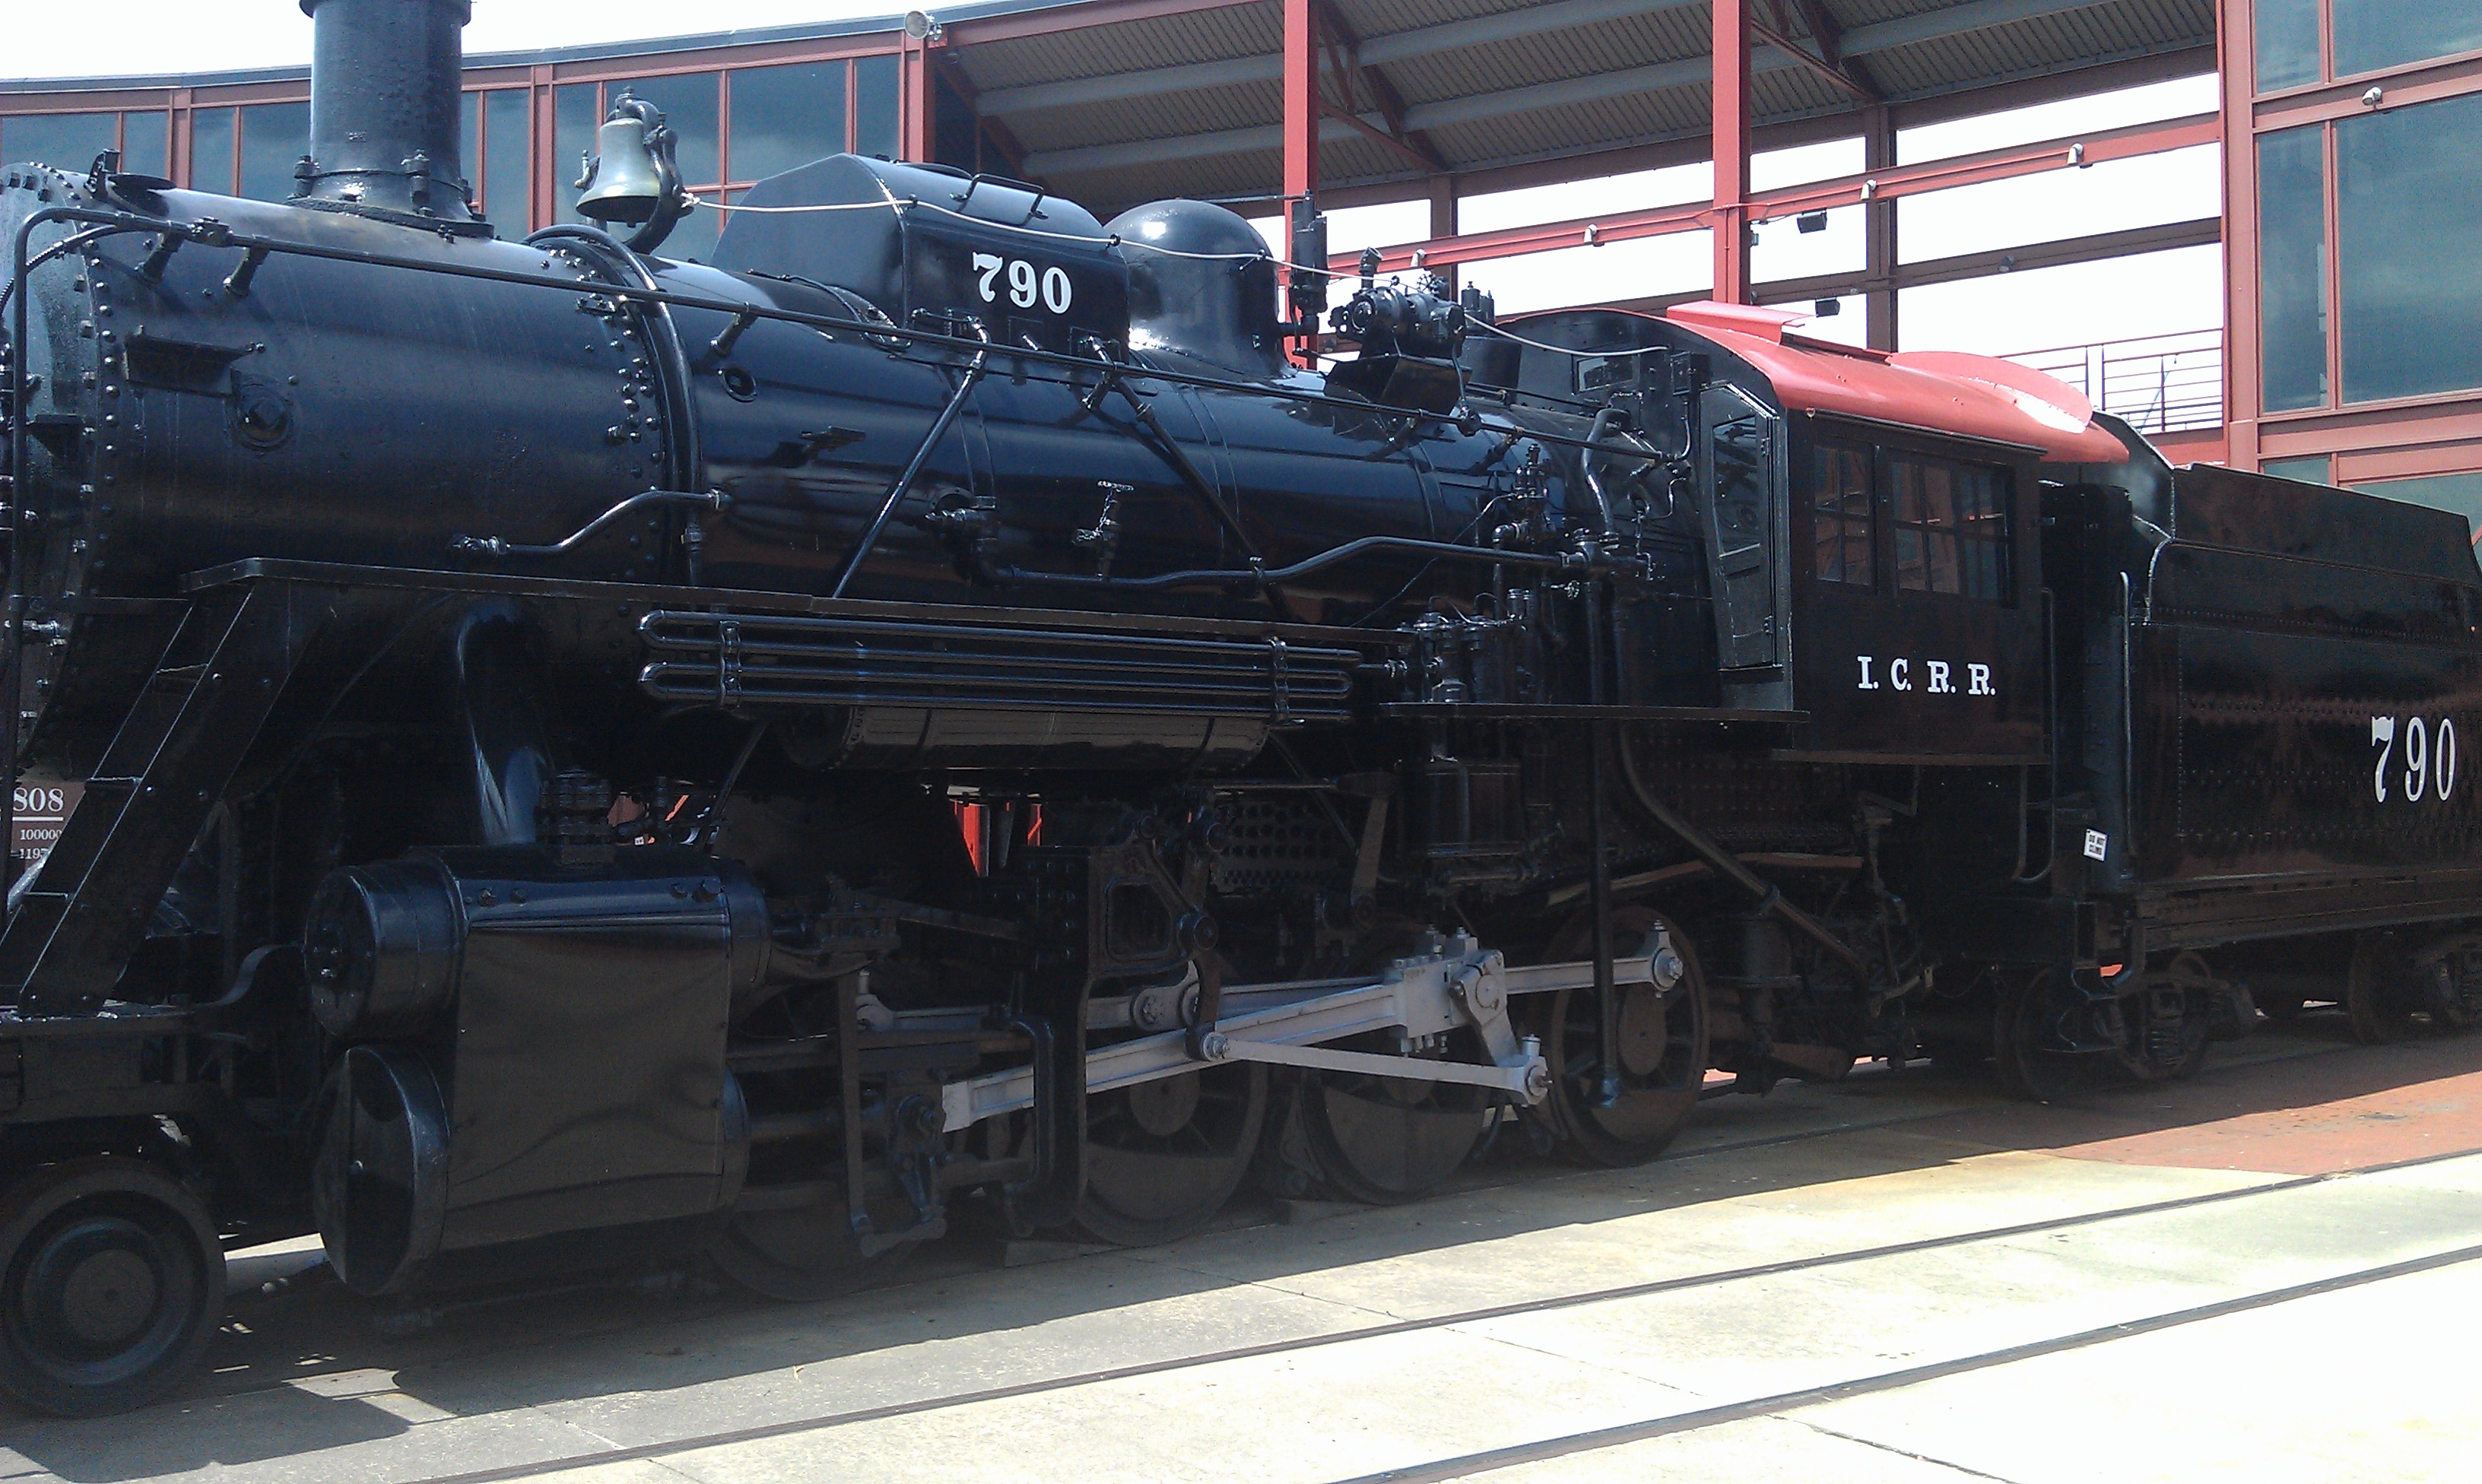 Photo 2 from Steamtown